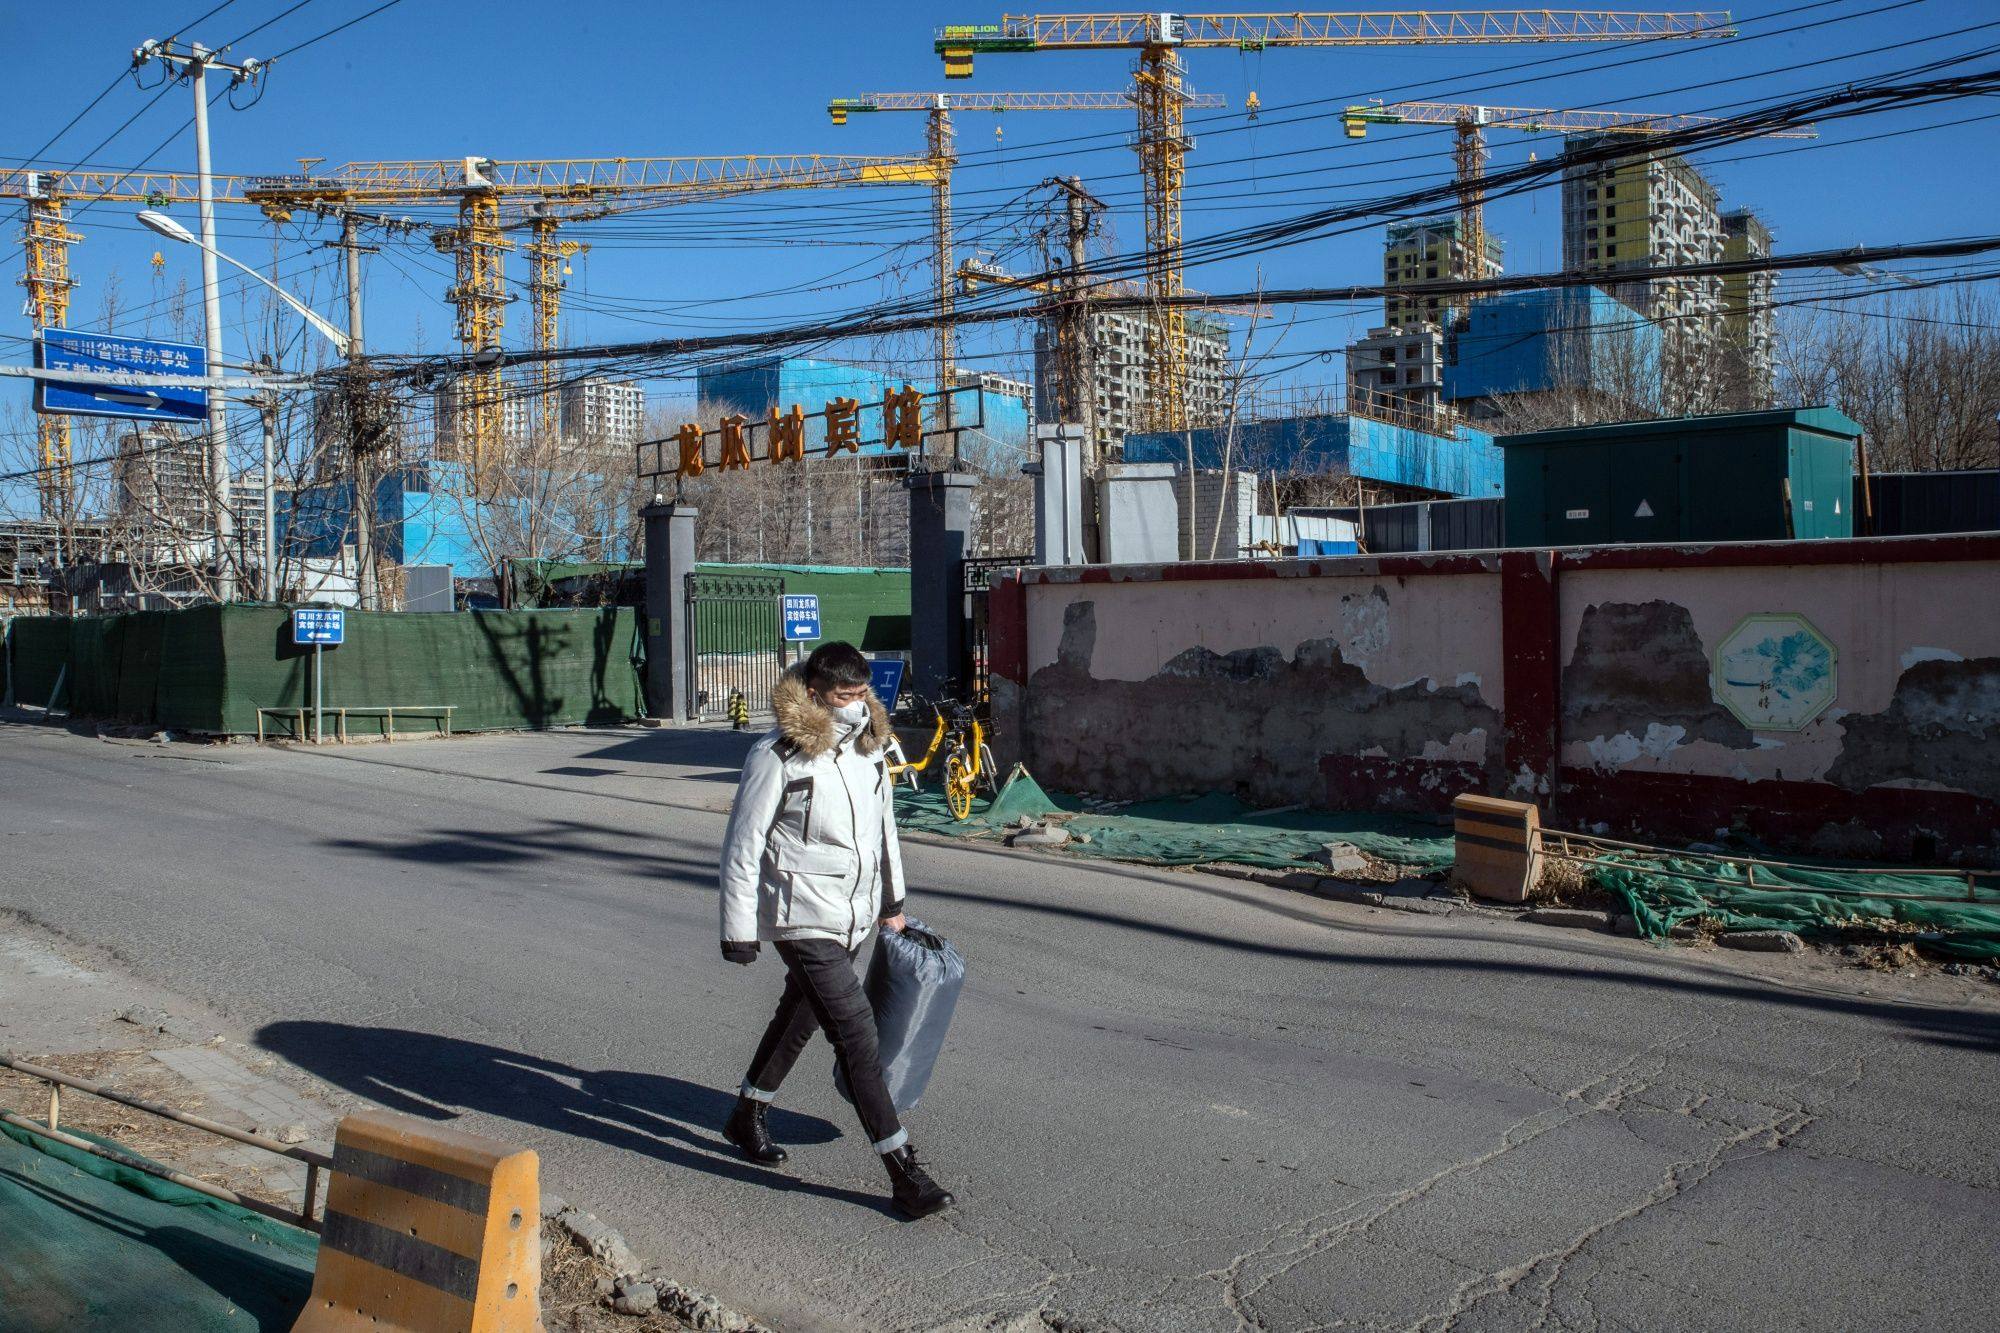 A residential project in Beijing originally developed by Shimao Group that was sold to state-owned rival China Resources Land, is seen in this file photo from December 2022. Shimao had 16 projects added to whitelists over the past week. Photo: Bloomberg